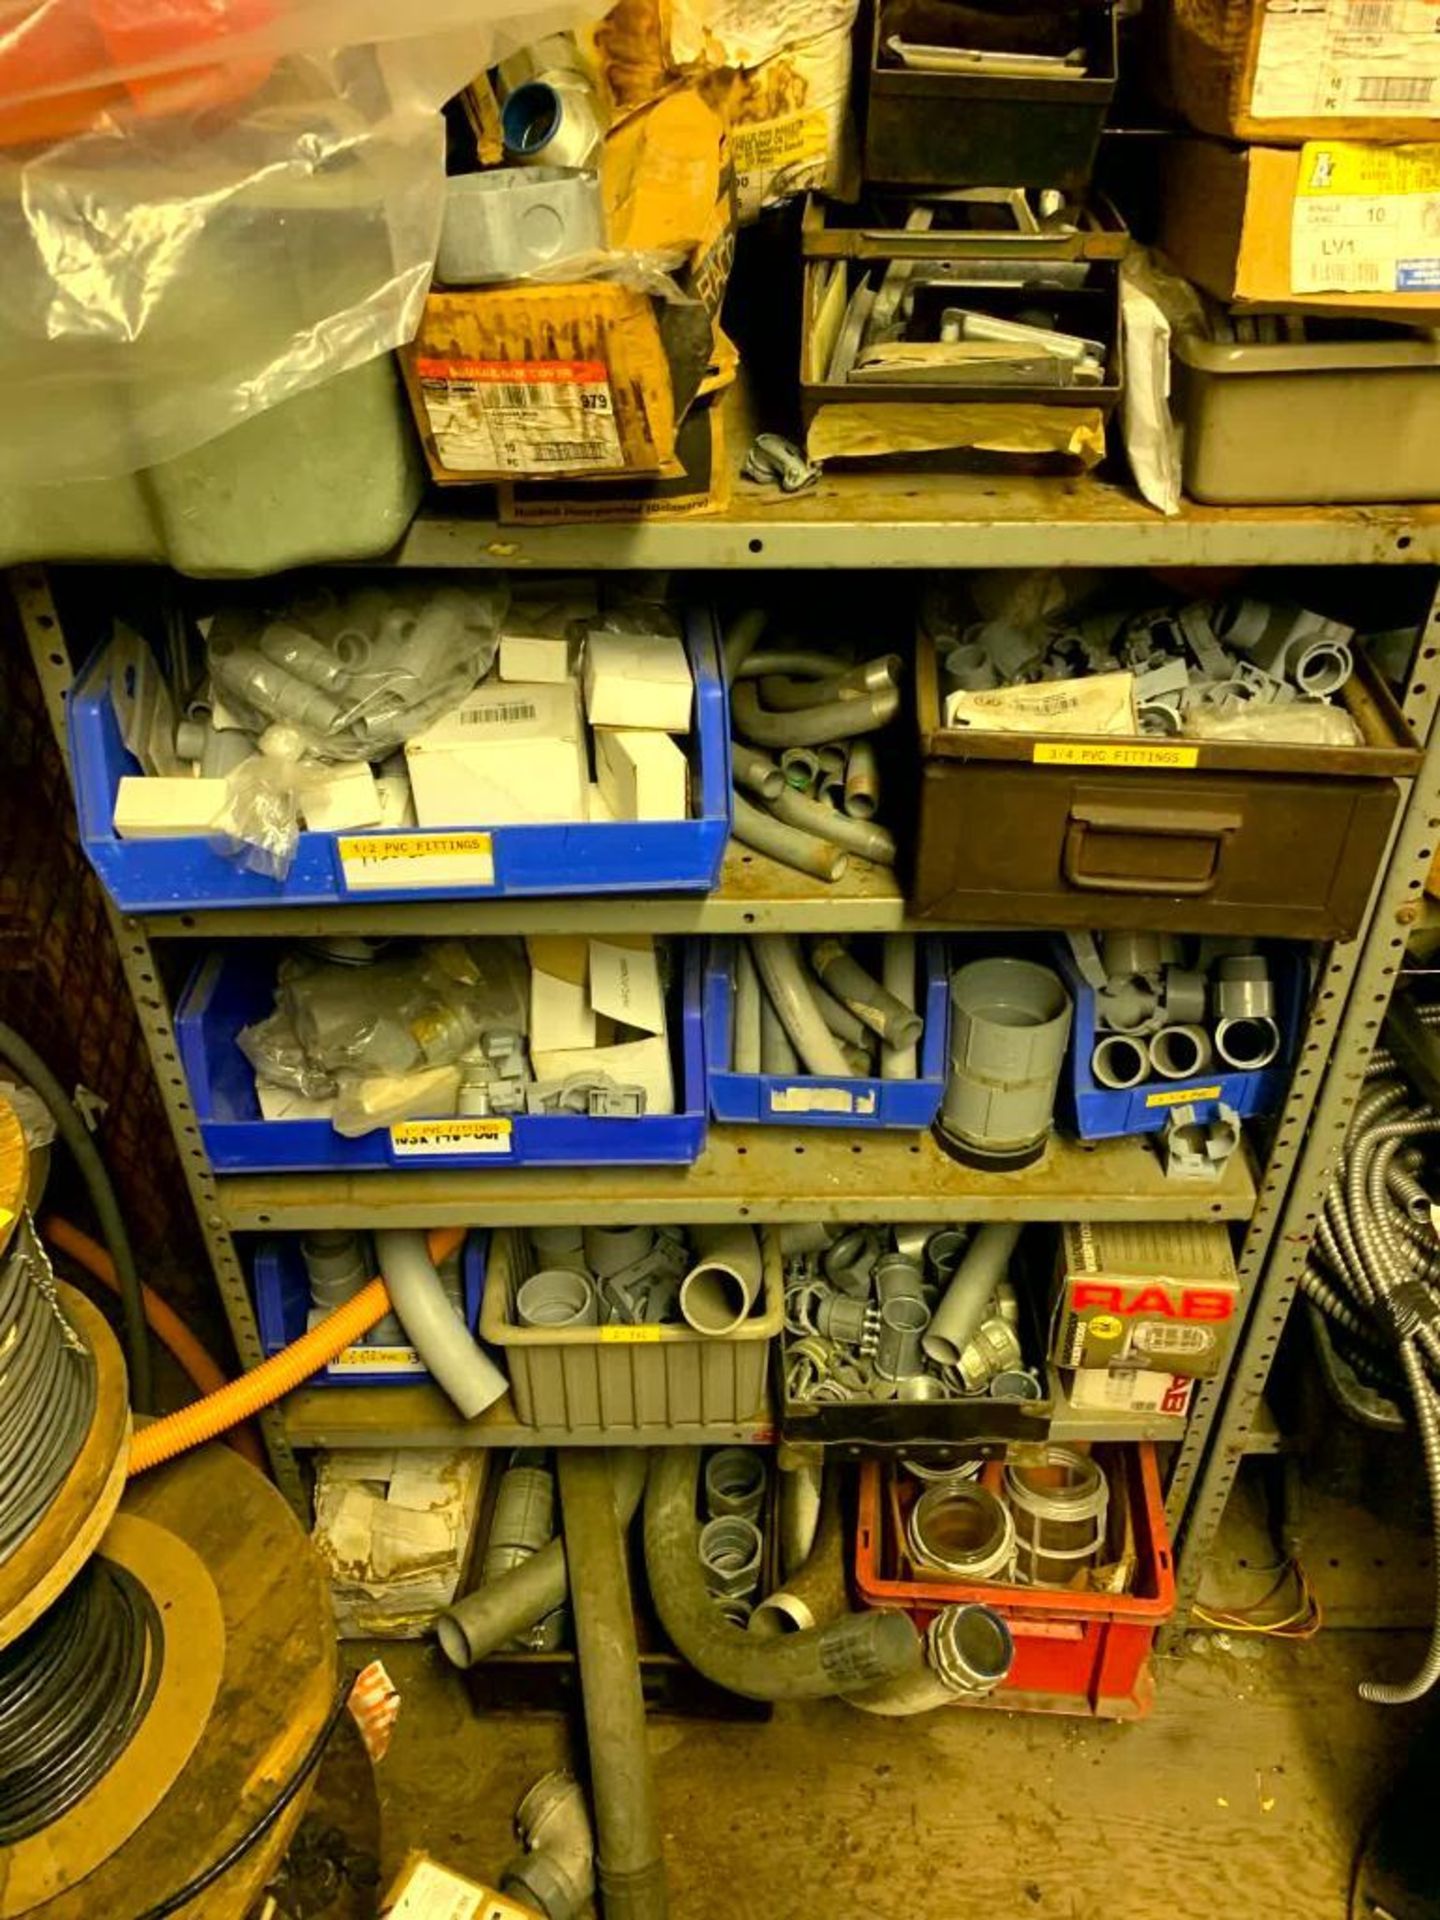 Content of Electrical Supply Room; Spools of Wire, Couplings, Breakers, Fuses, & Much More - Image 11 of 18